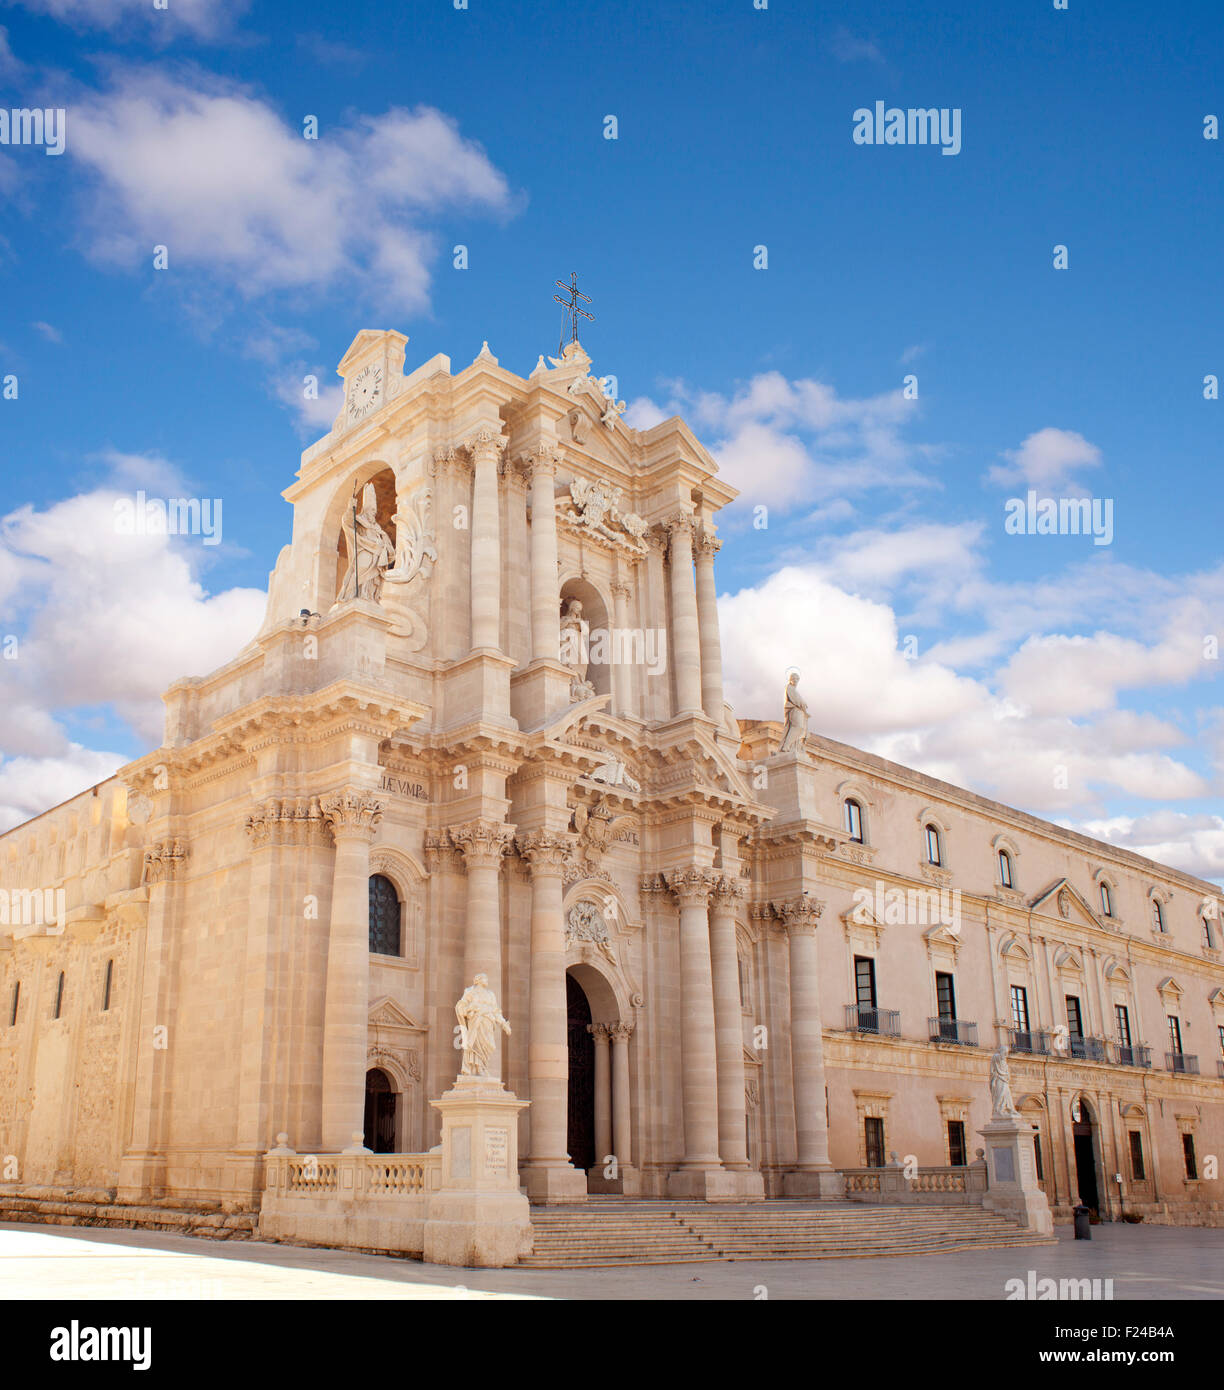 View of Duomo di Siracusa - Siracusa cathedral on blue sky, Sicily - Iyaly Stock Photo